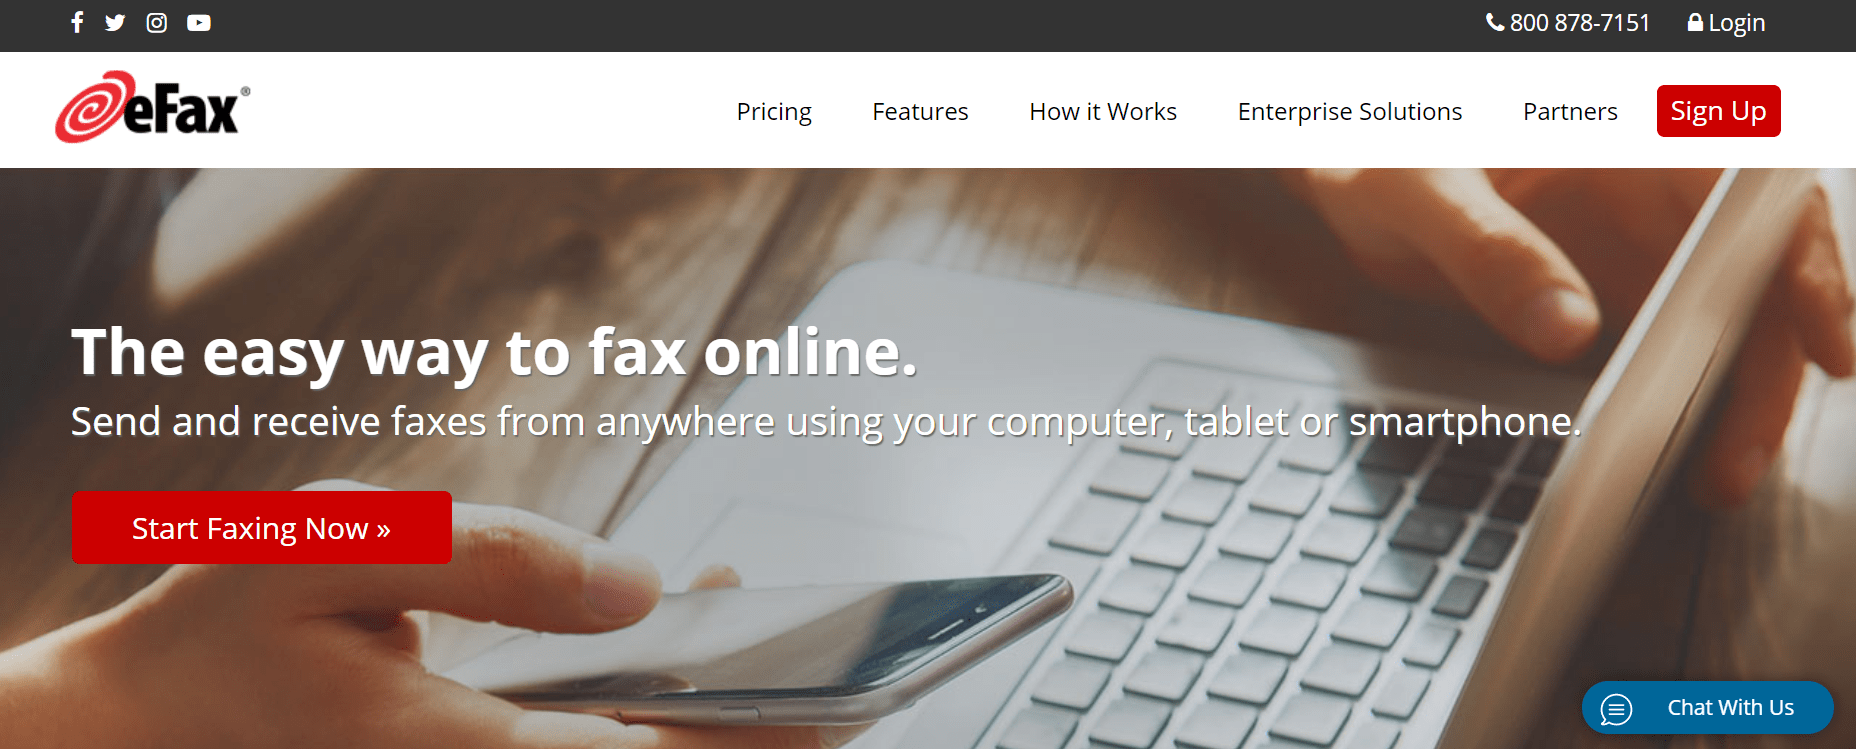 efax coupons